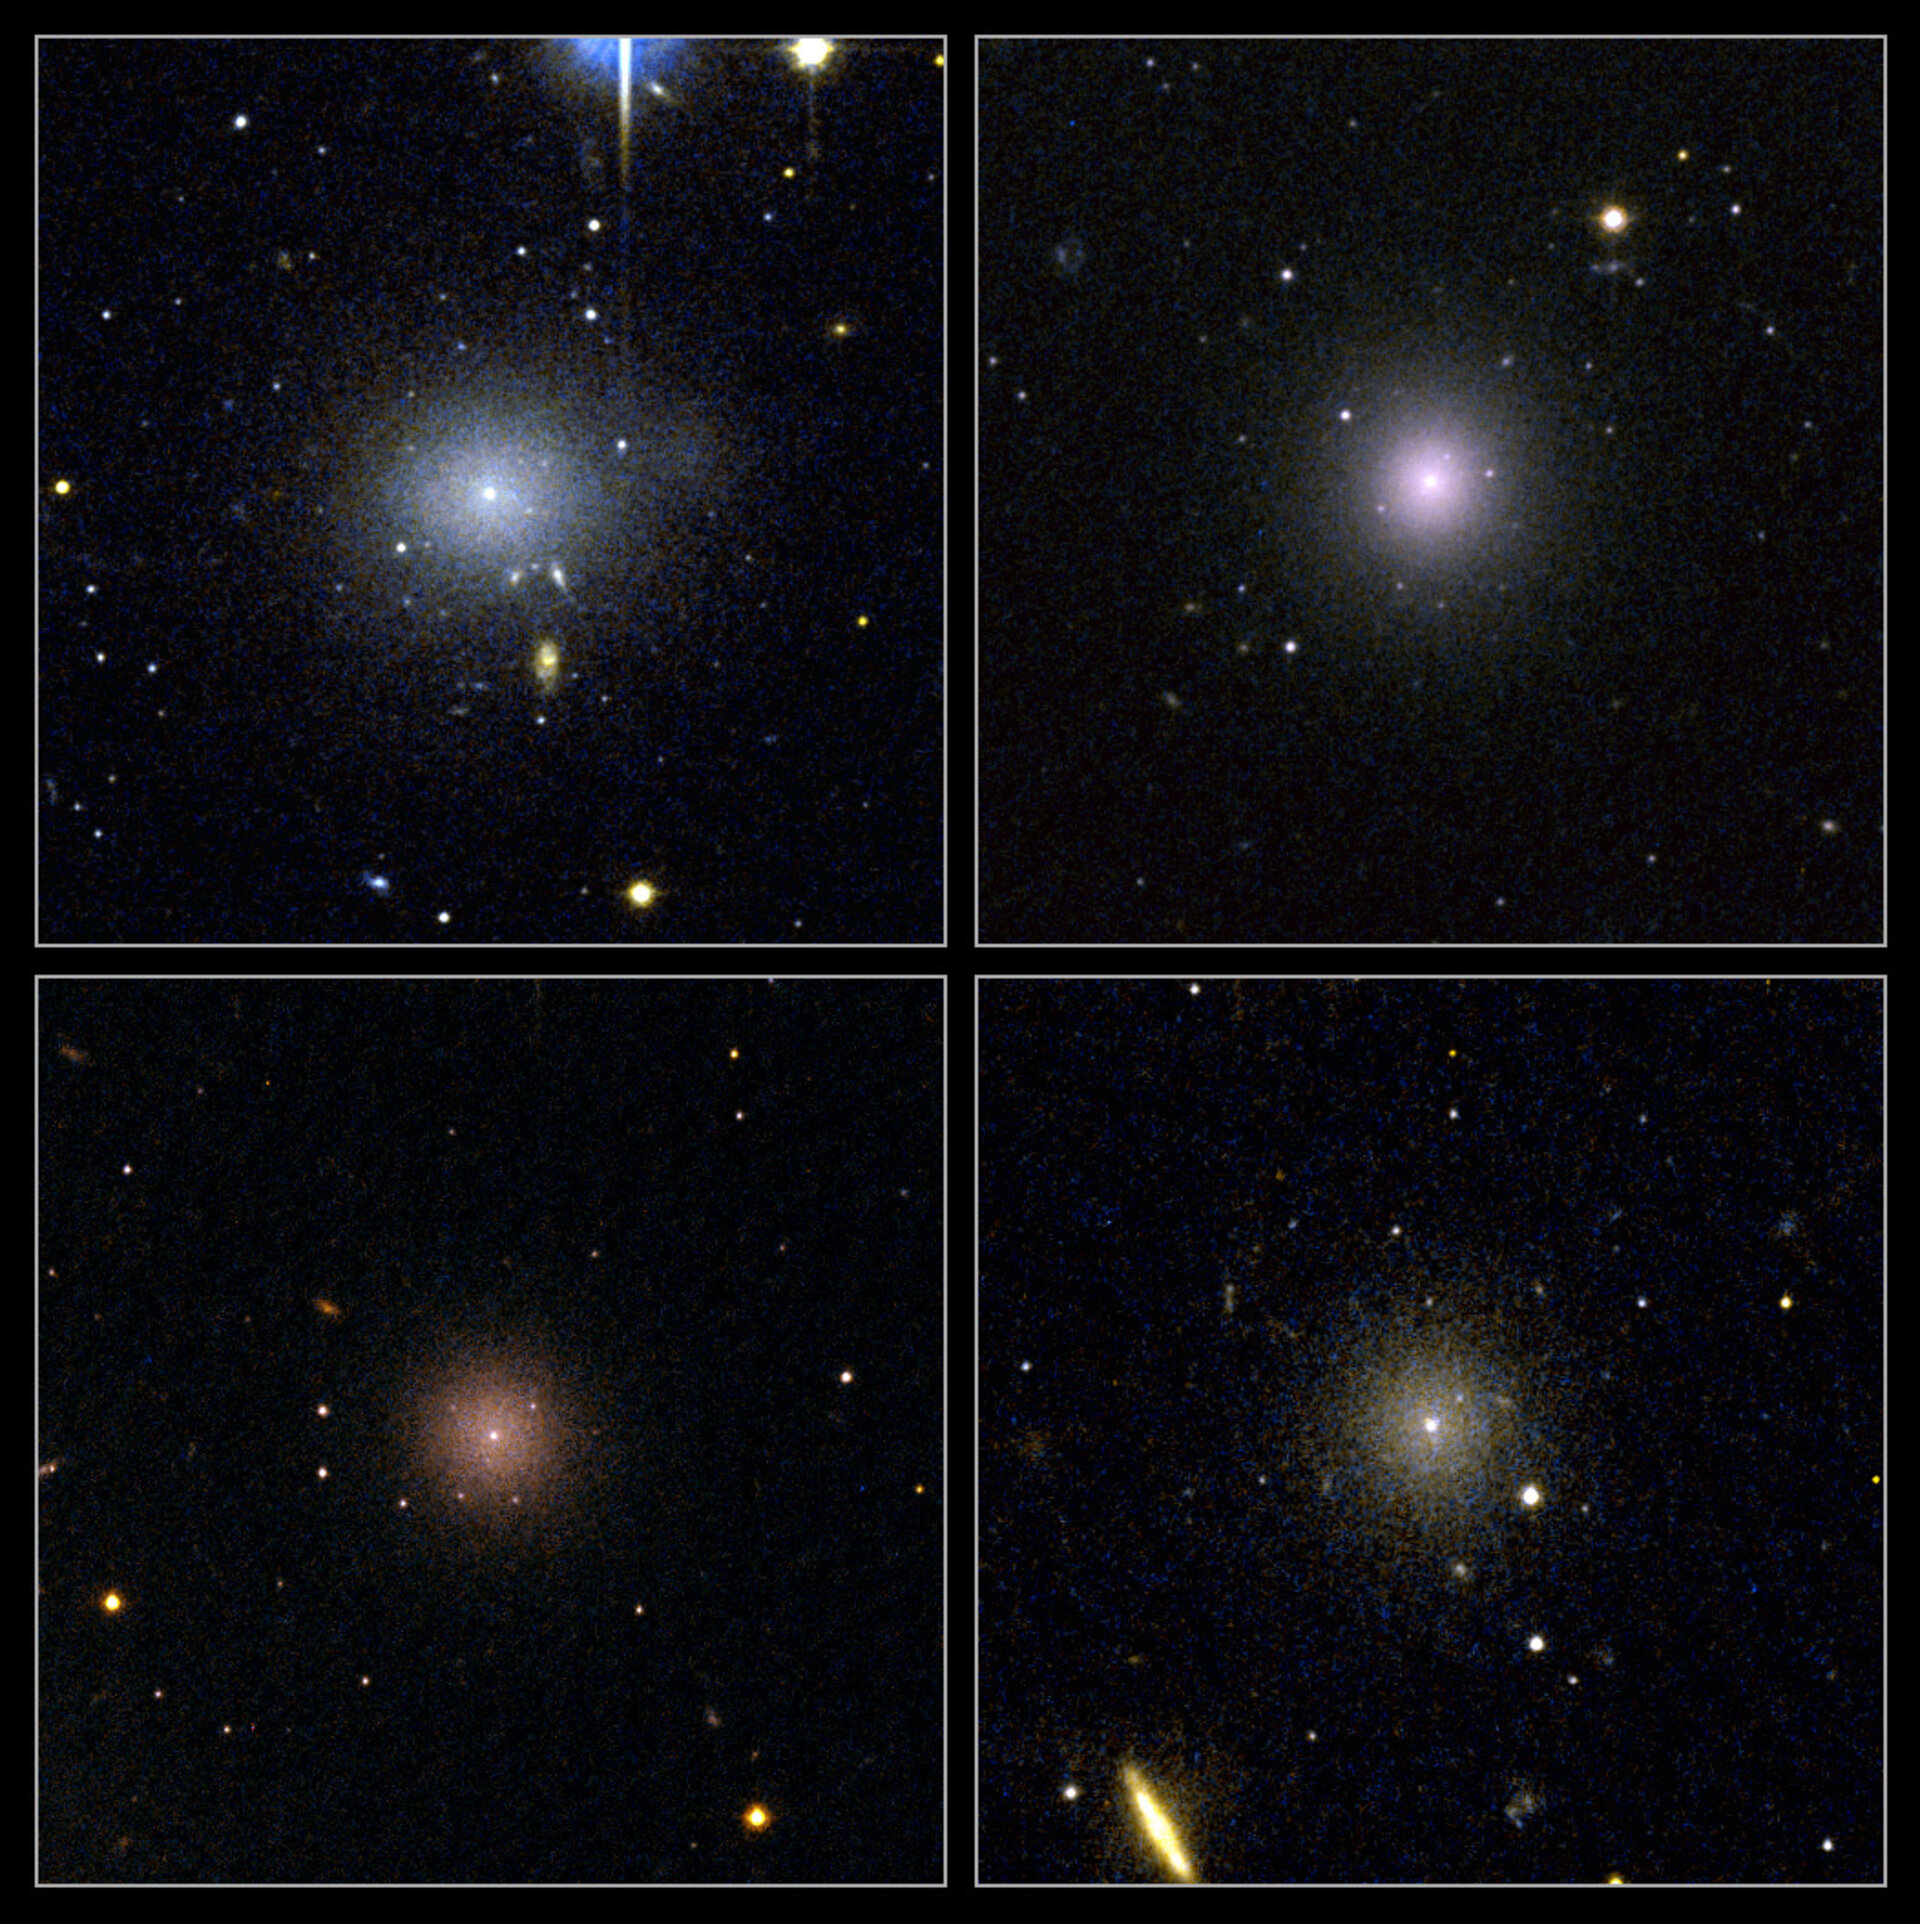 Small galaxies yield clues about dark matter